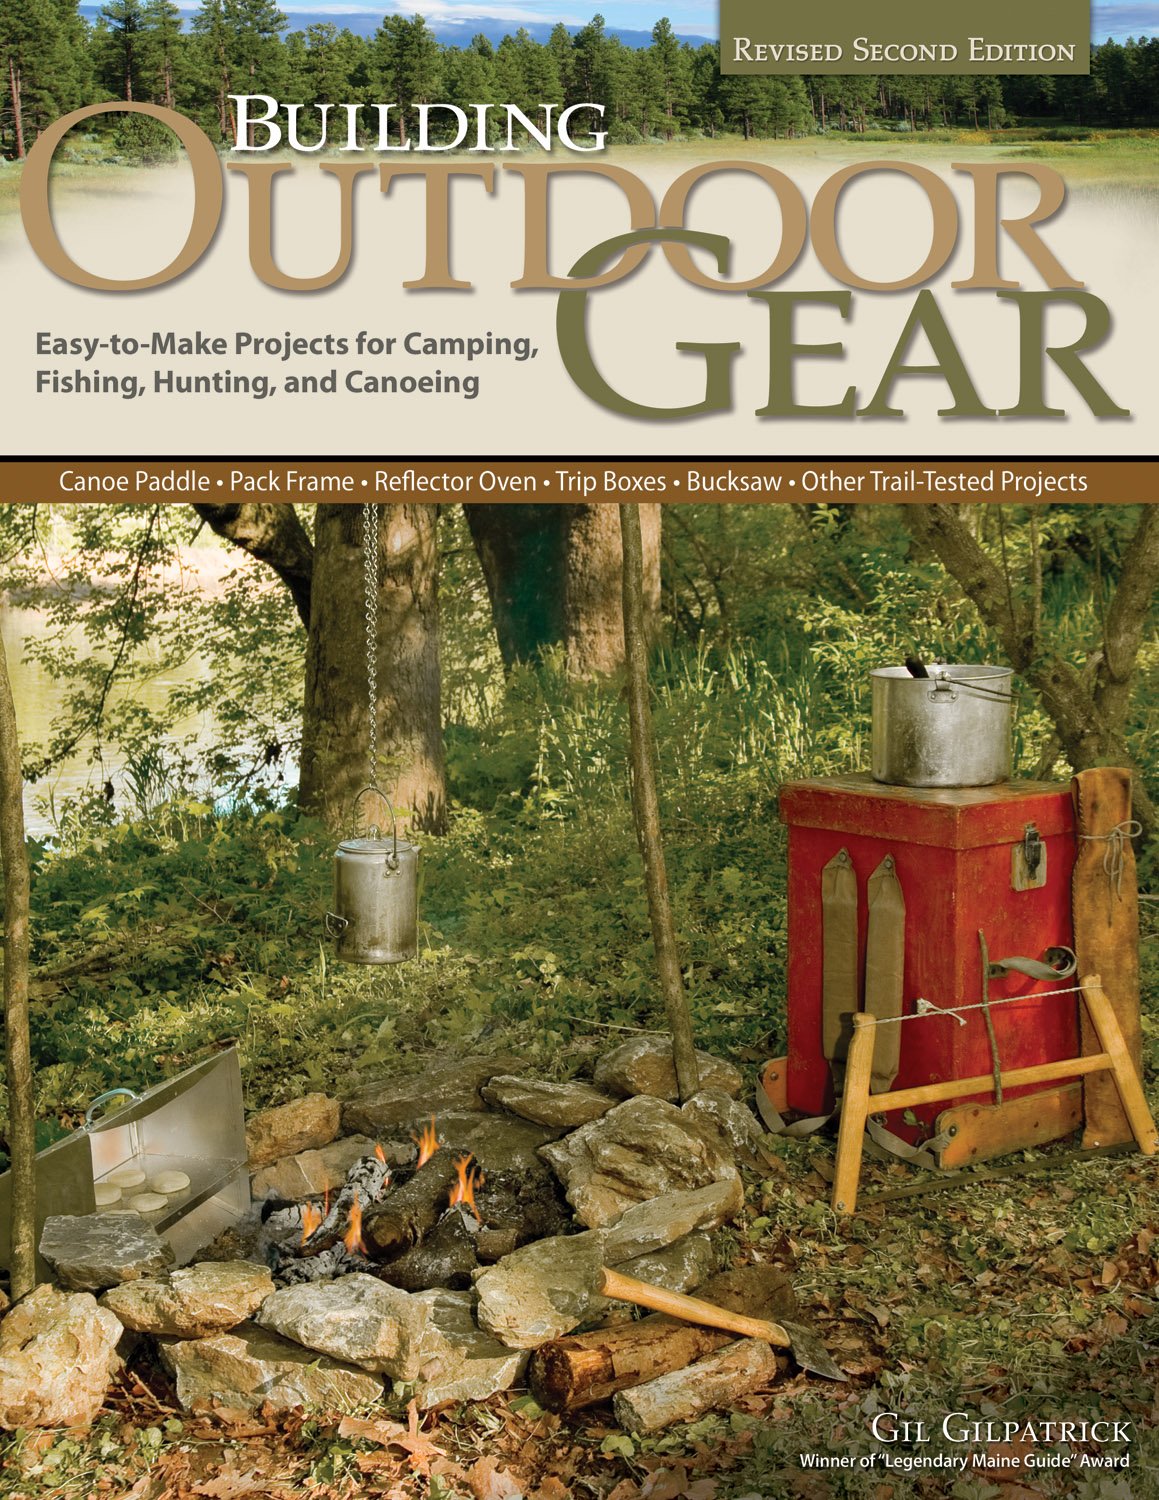 Building Outdoor Gear: Easy-to-Make Projects for Camping, Fishing, Hun -  Shelter Institute